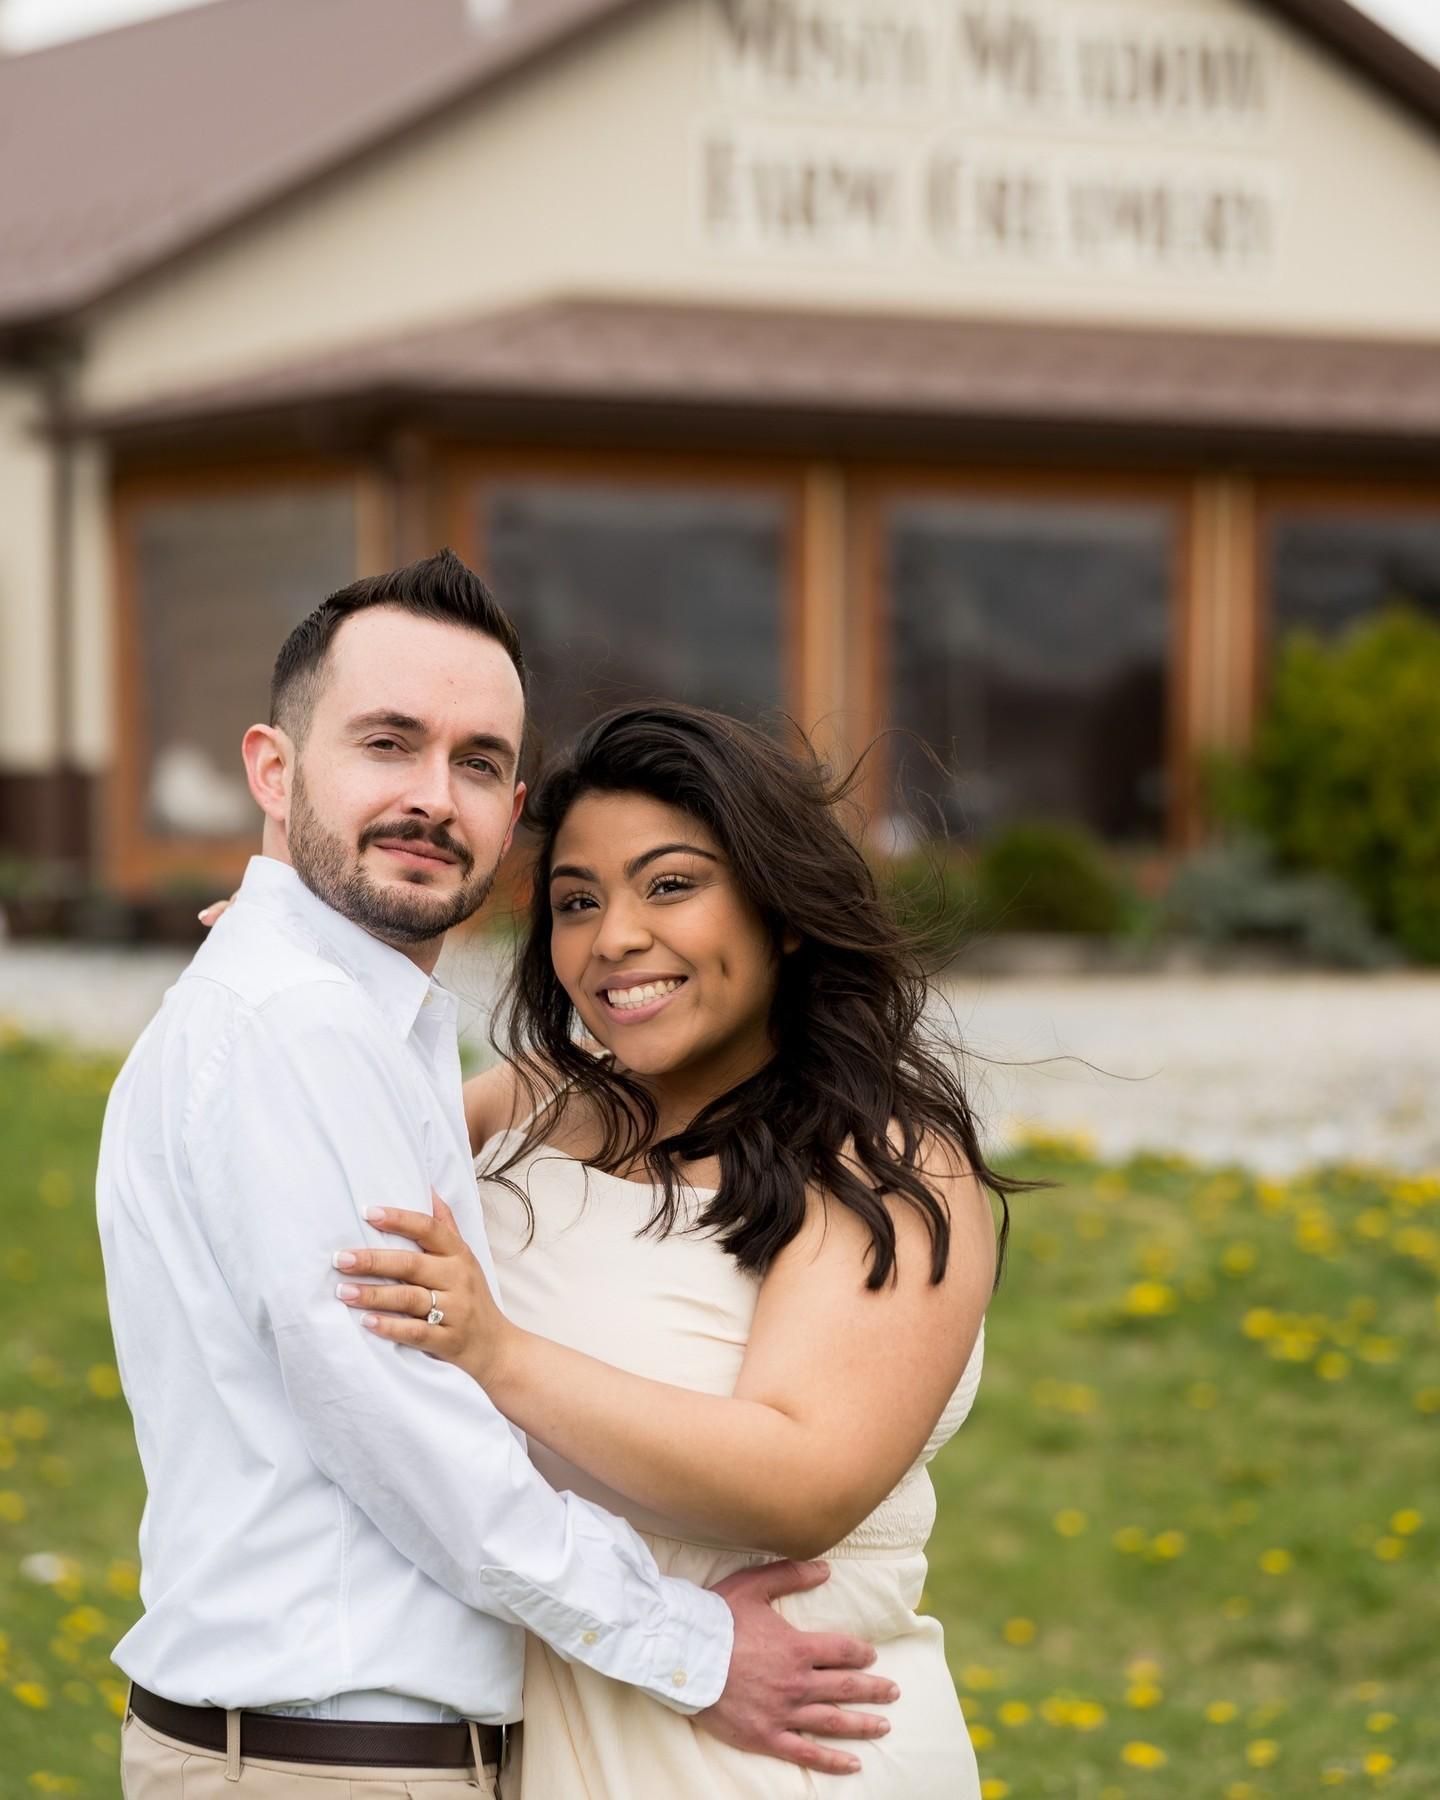 Misty and Foggy Engagement at Misty Meadows Farm Creamery in Smithsburg, MD